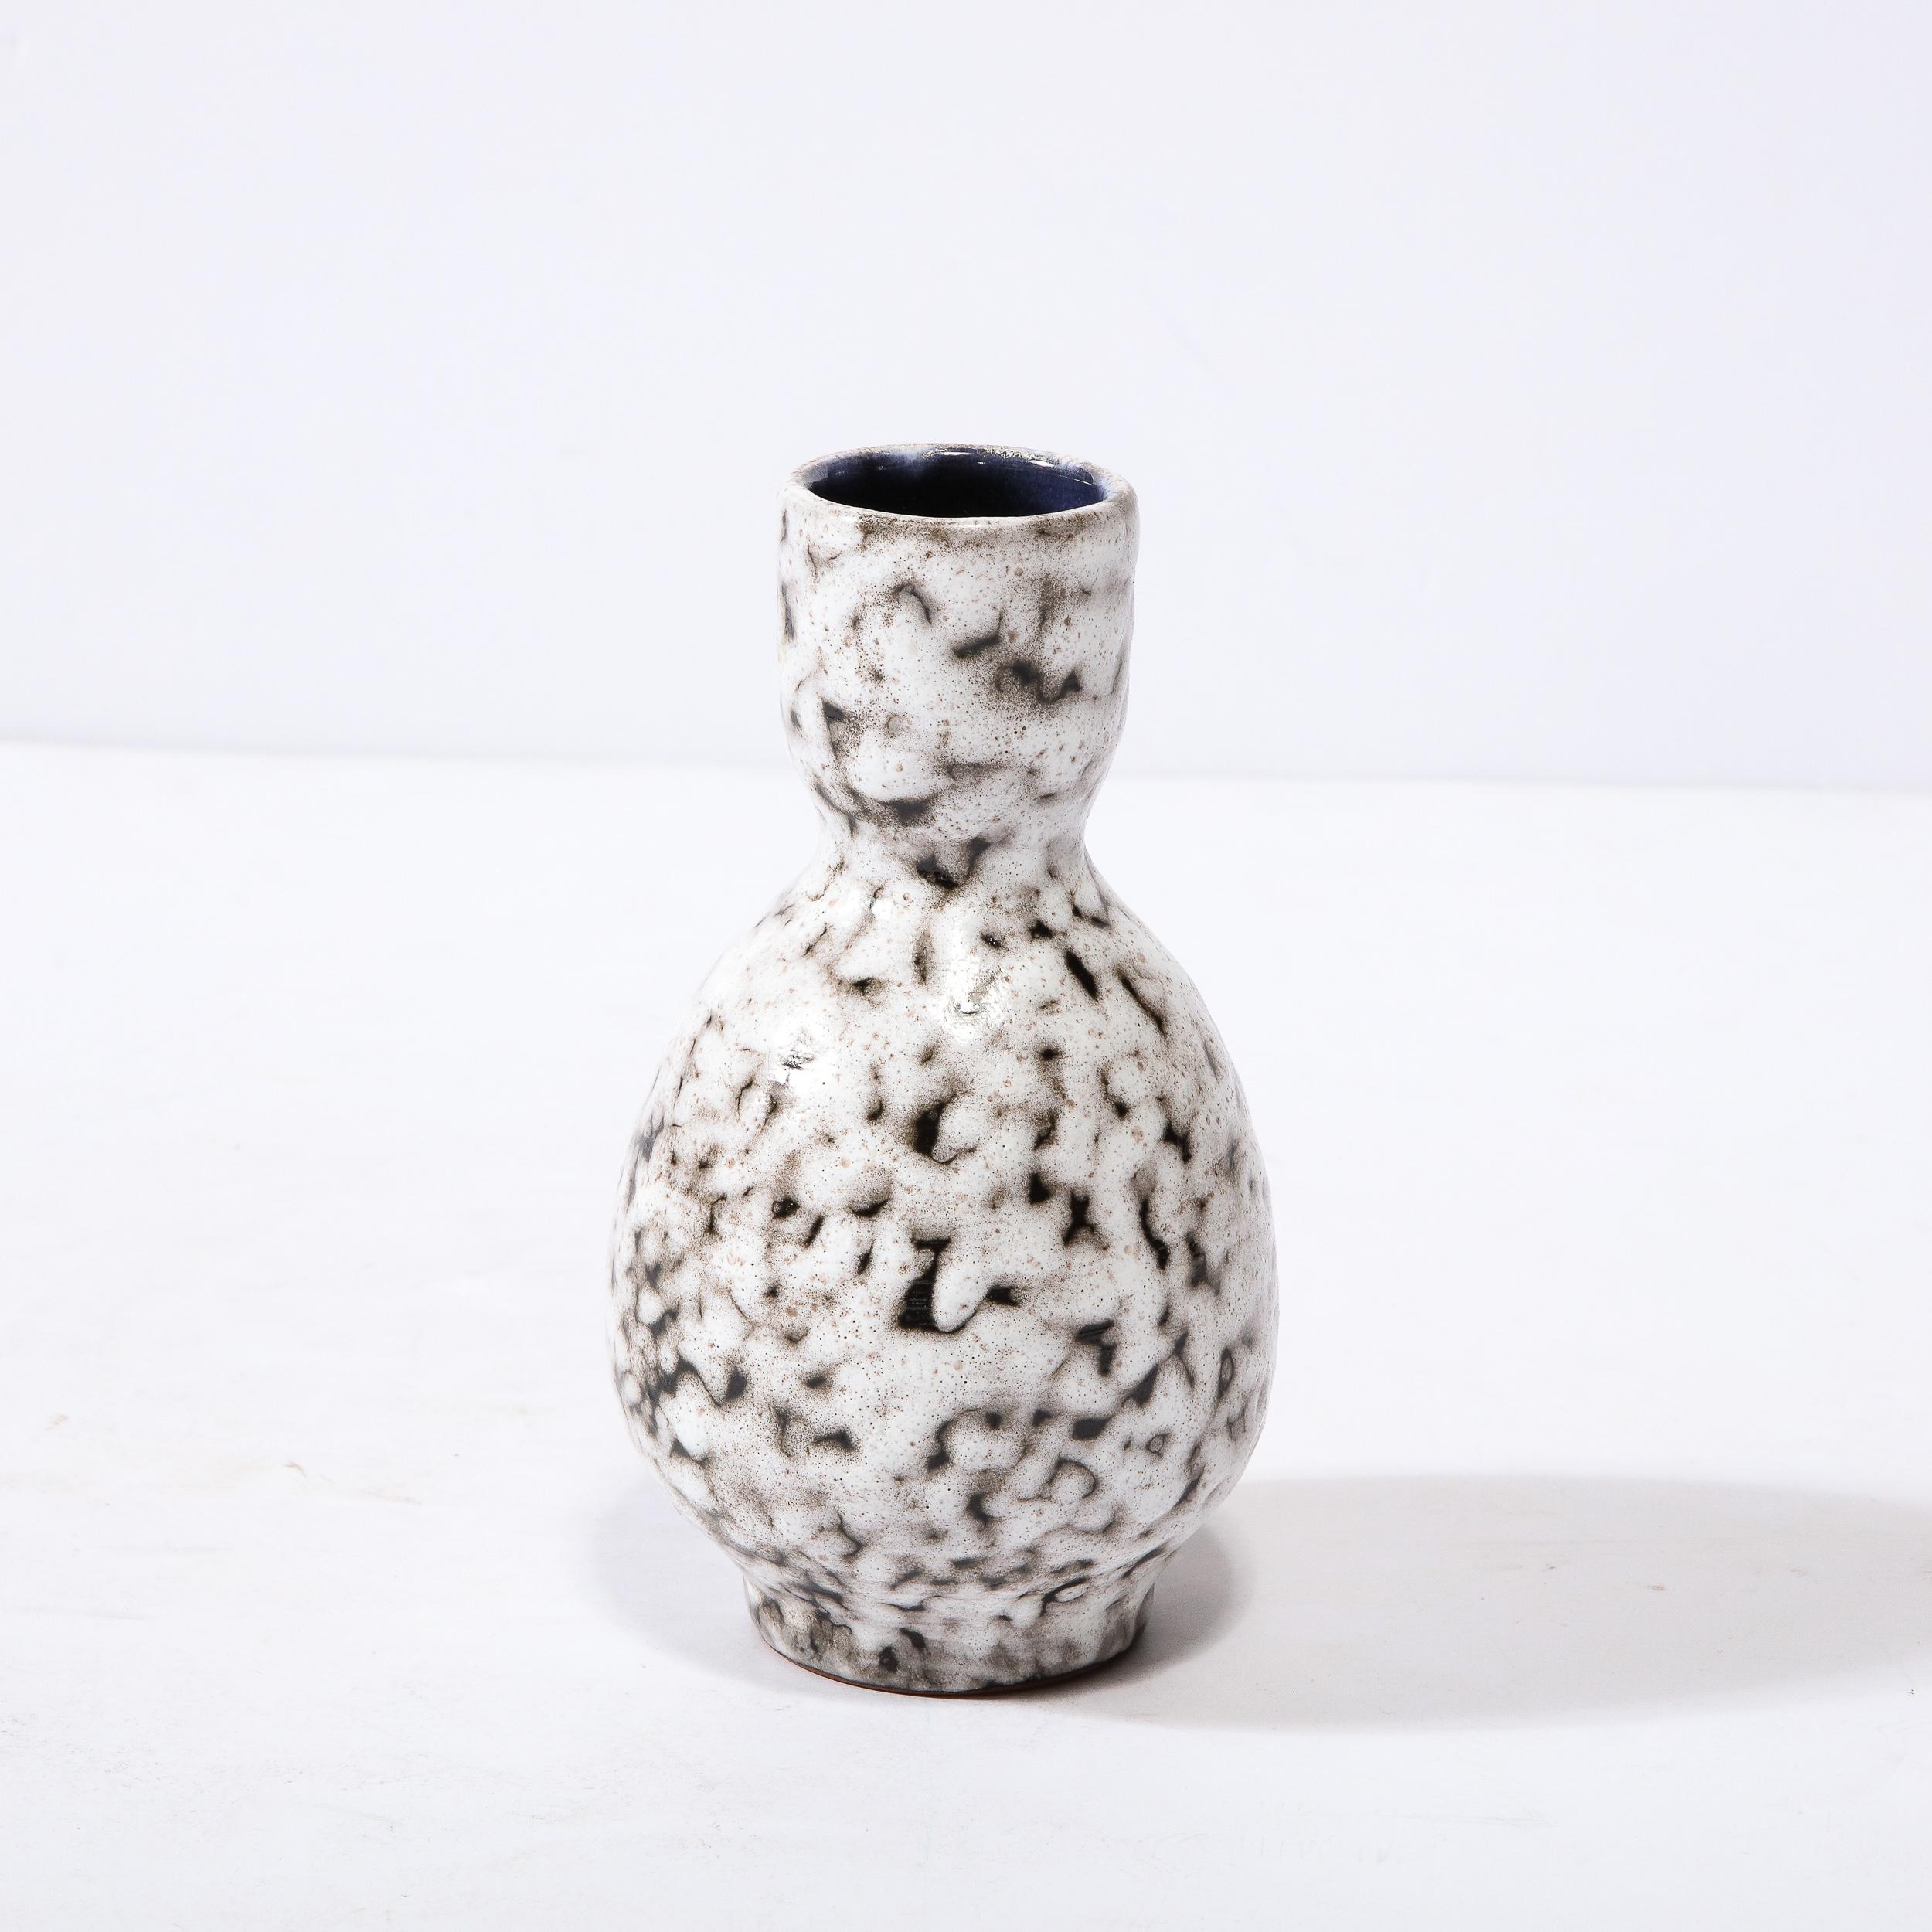 This Mid-Century Modernist Ceramic Vase is a beautiful example of Post War European Ceramics, realized in Hódmezovasarhely Majolikagyár, Hungary Circa 1960. With a Stunning textural finish composed in Cream White and Blackened Umber, the surface of